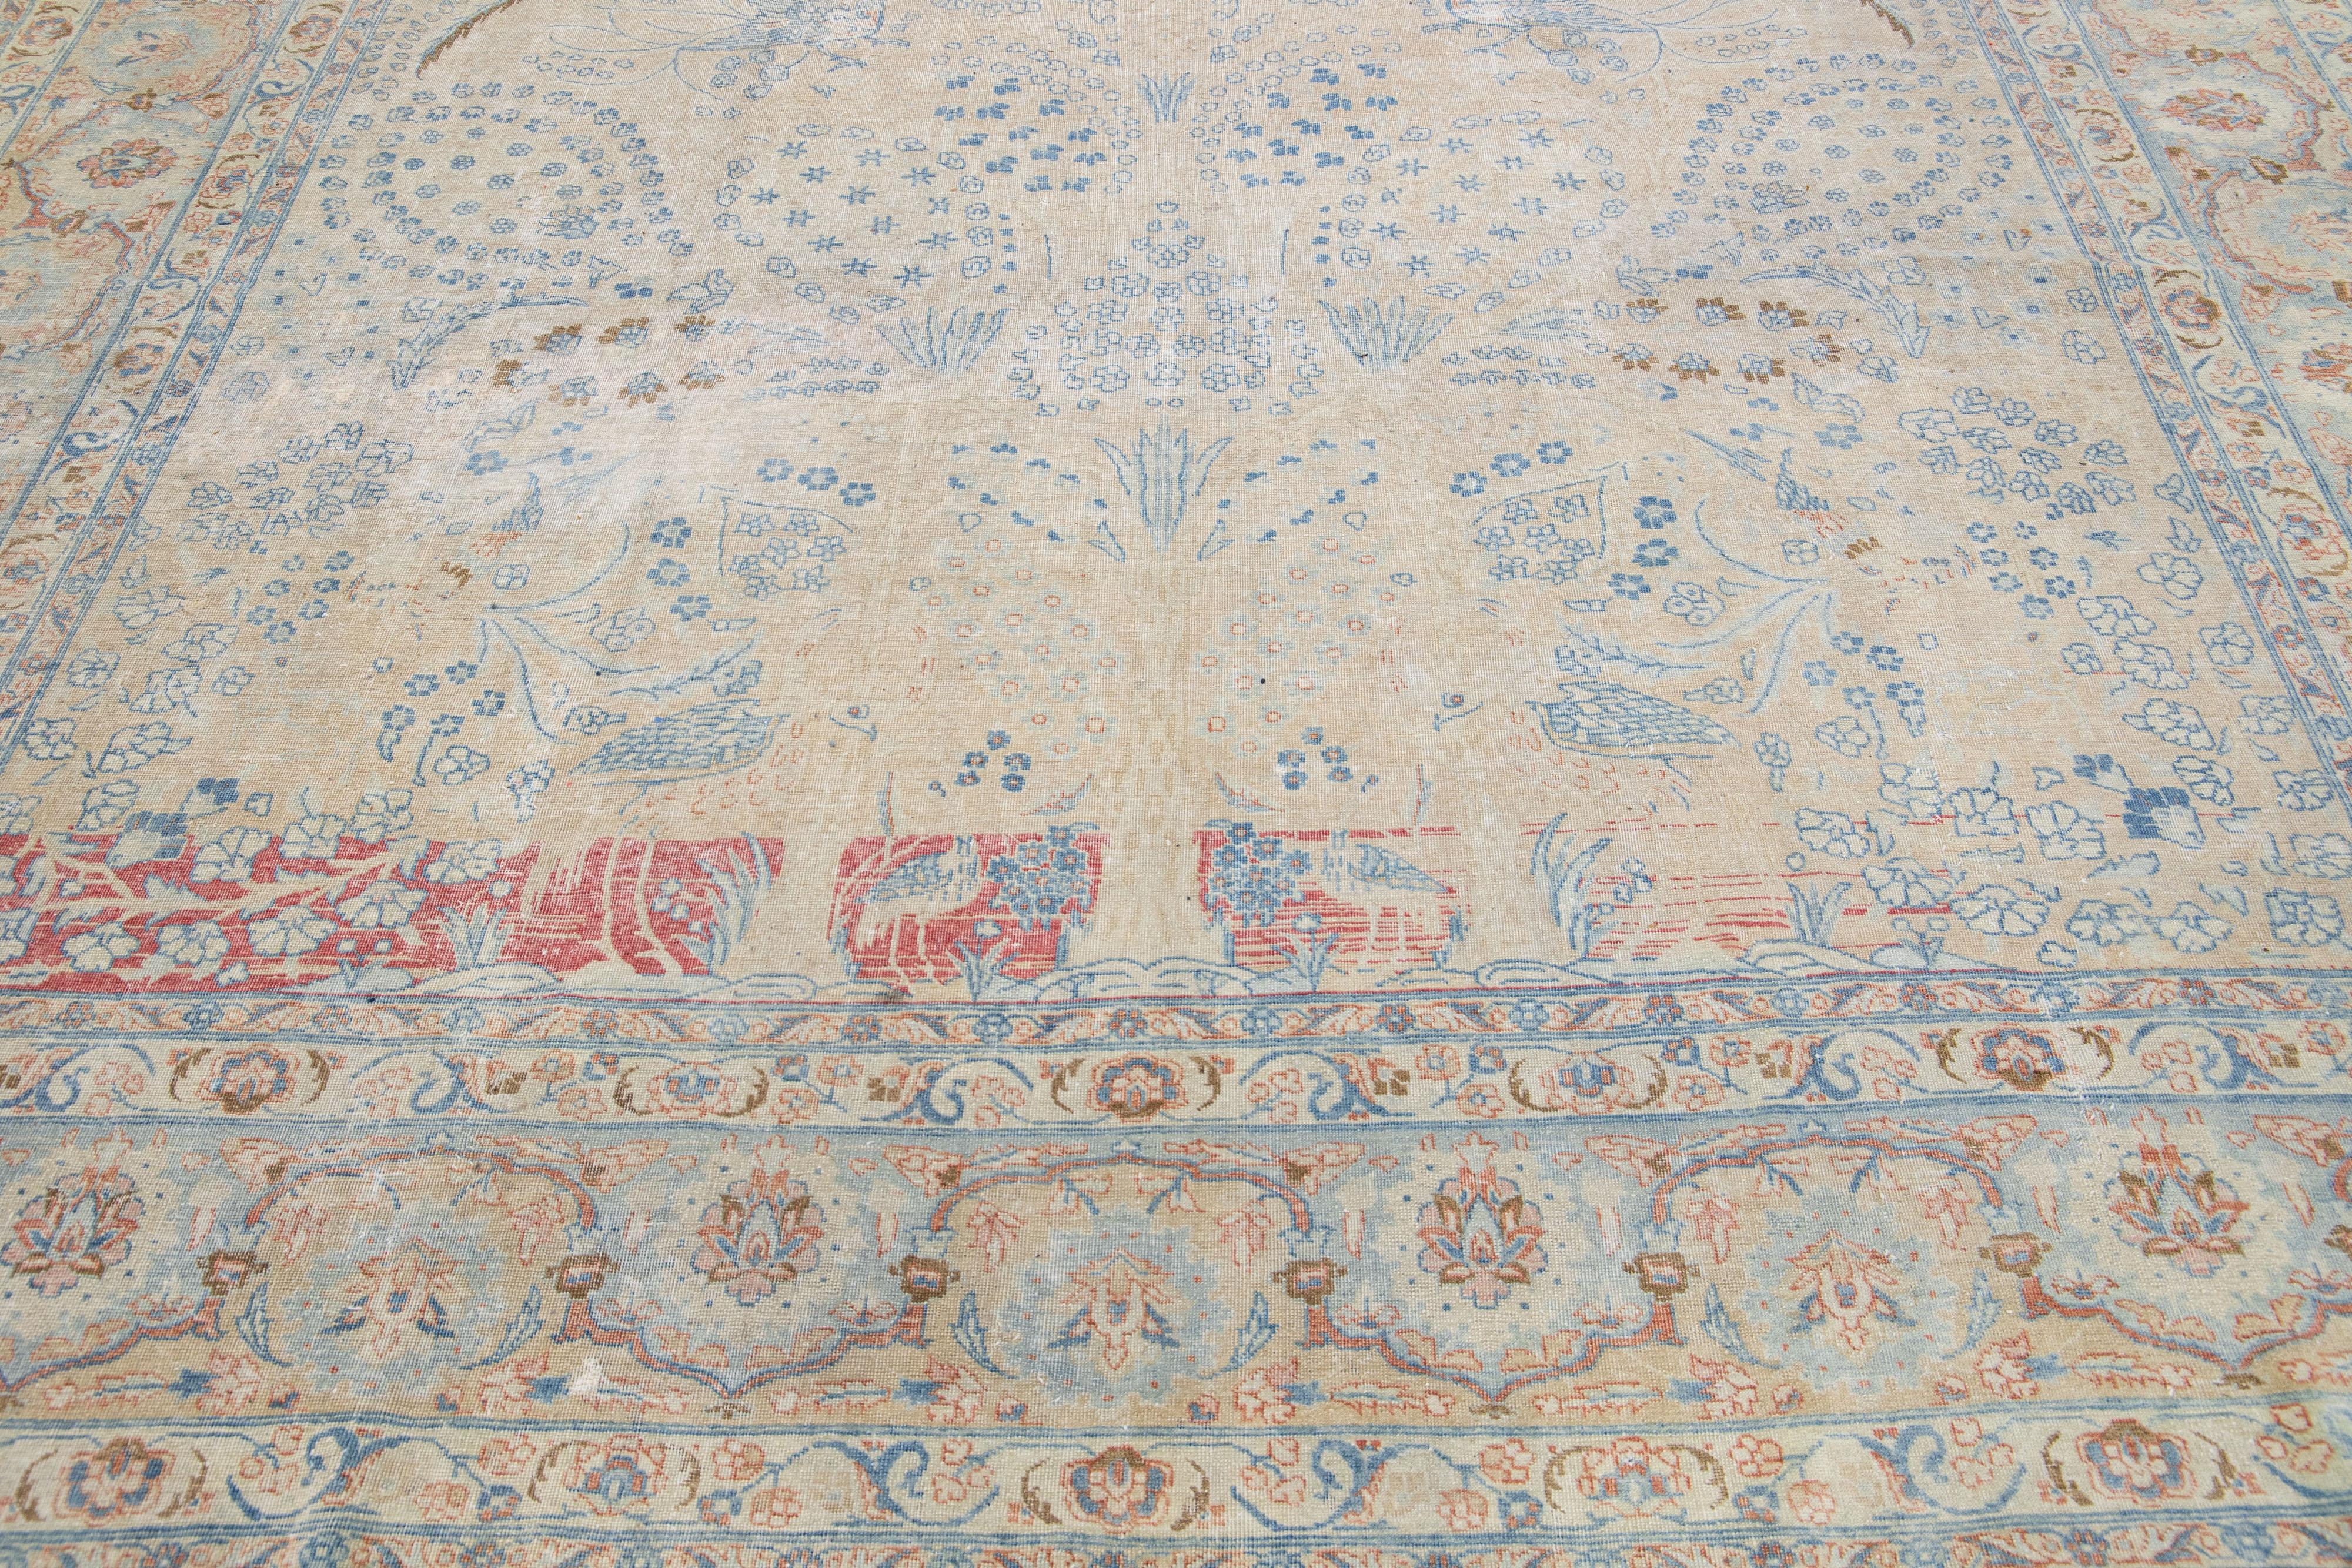 Beautiful antique Persian hand-knotted wool rug with a beige color field. This piece has a blue-designed frame with peach and brown accents in a gorgeous all-over floral design.

This rug measures: 9'8